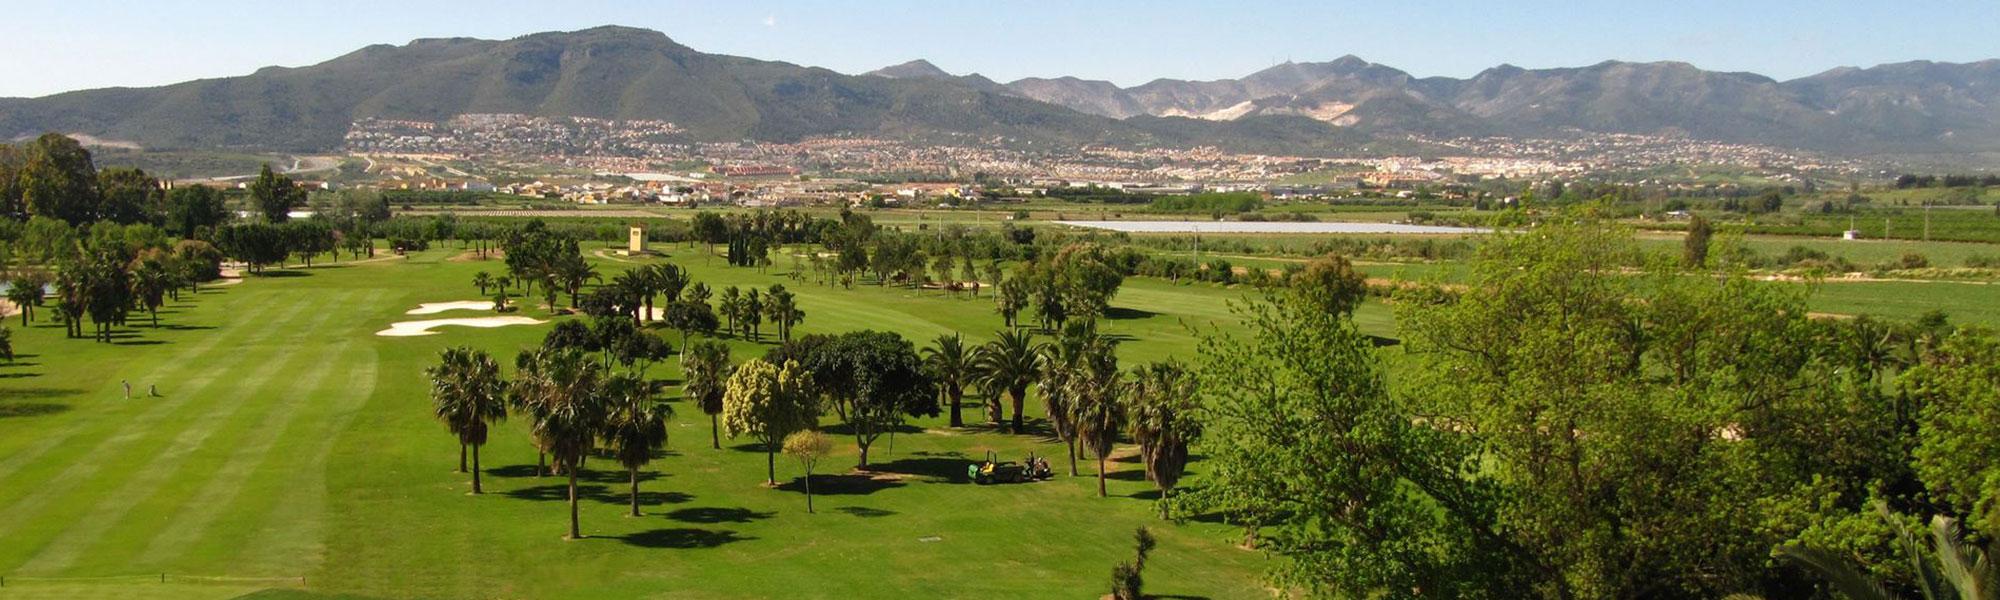 View Guadalhorce Golf Club's impressive golf course situated in incredible Costa Del Sol.